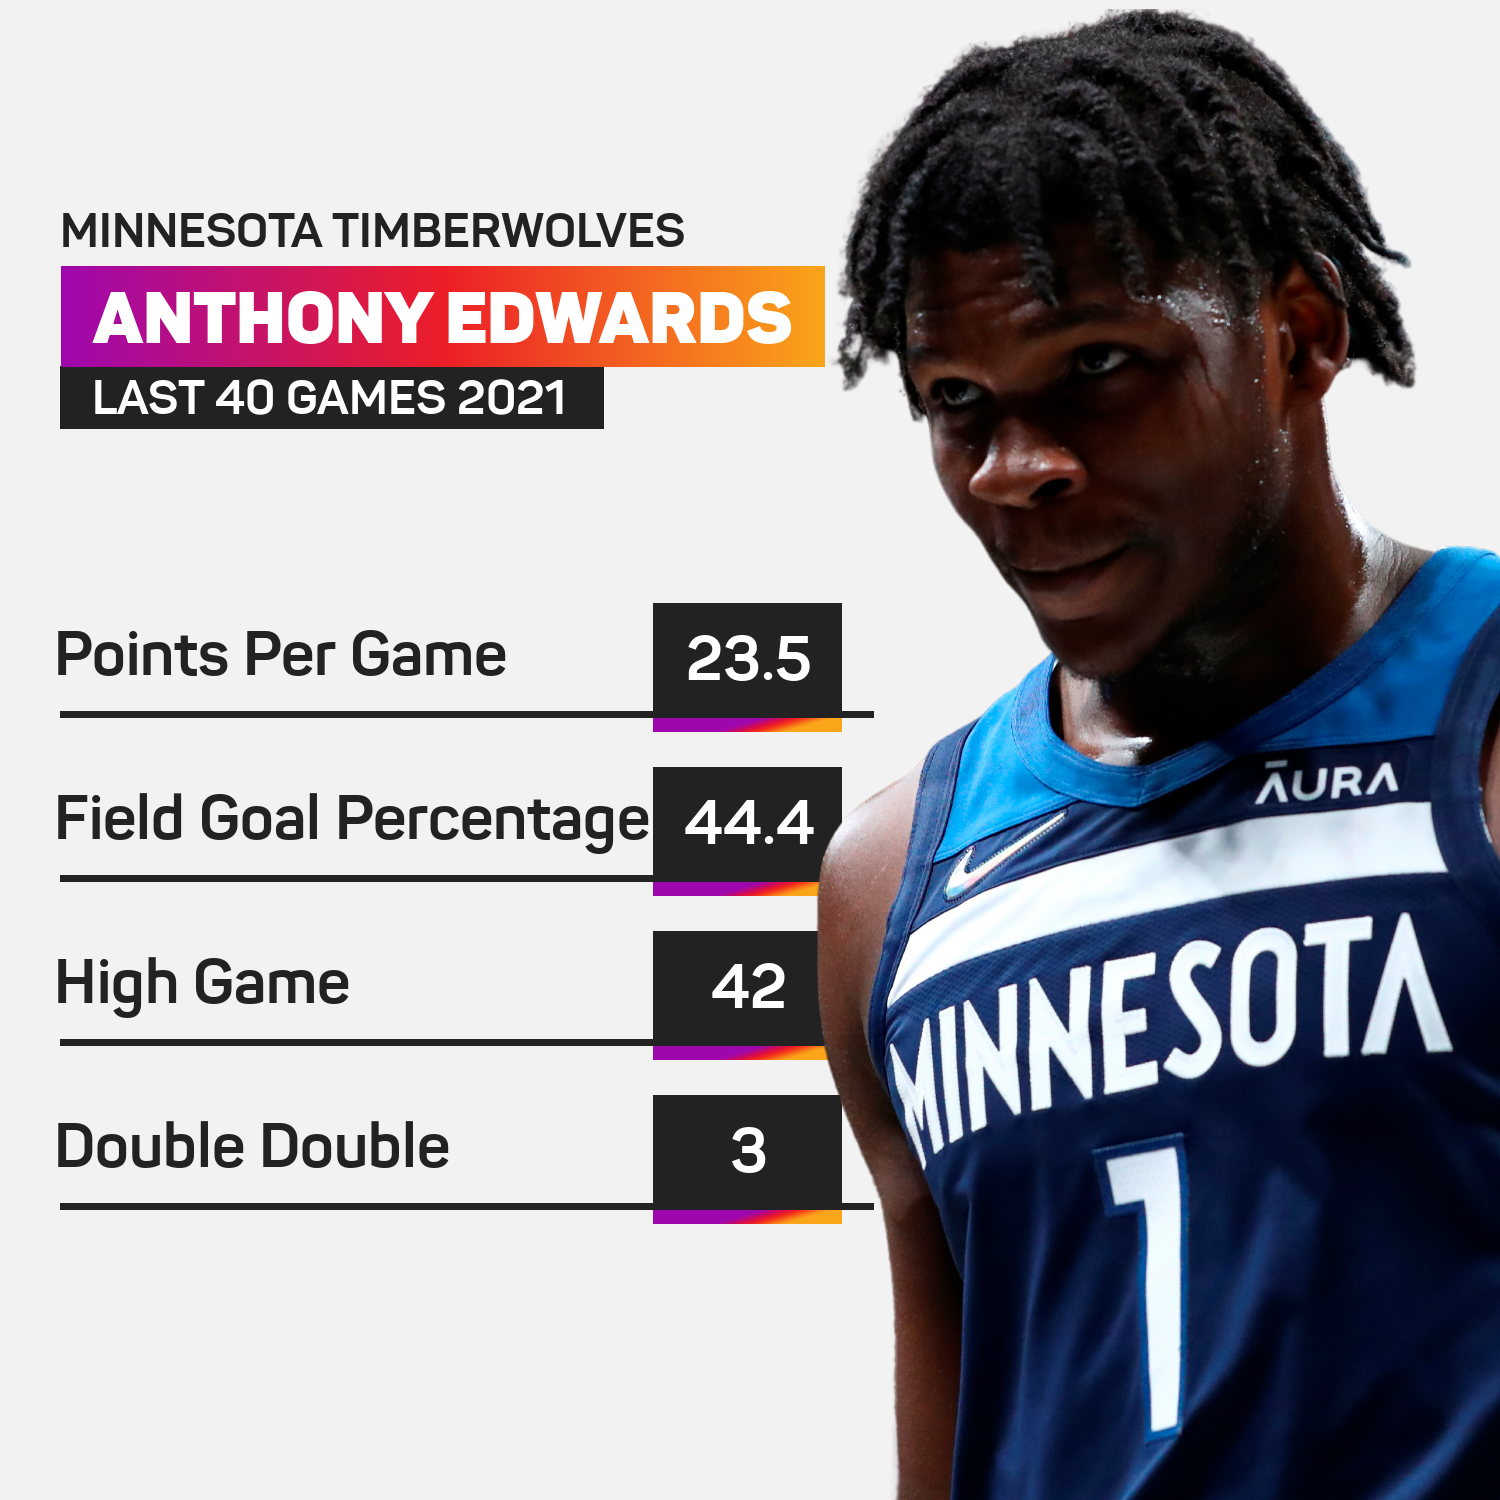 Anthony Edwards improved in the second half of his rookie year